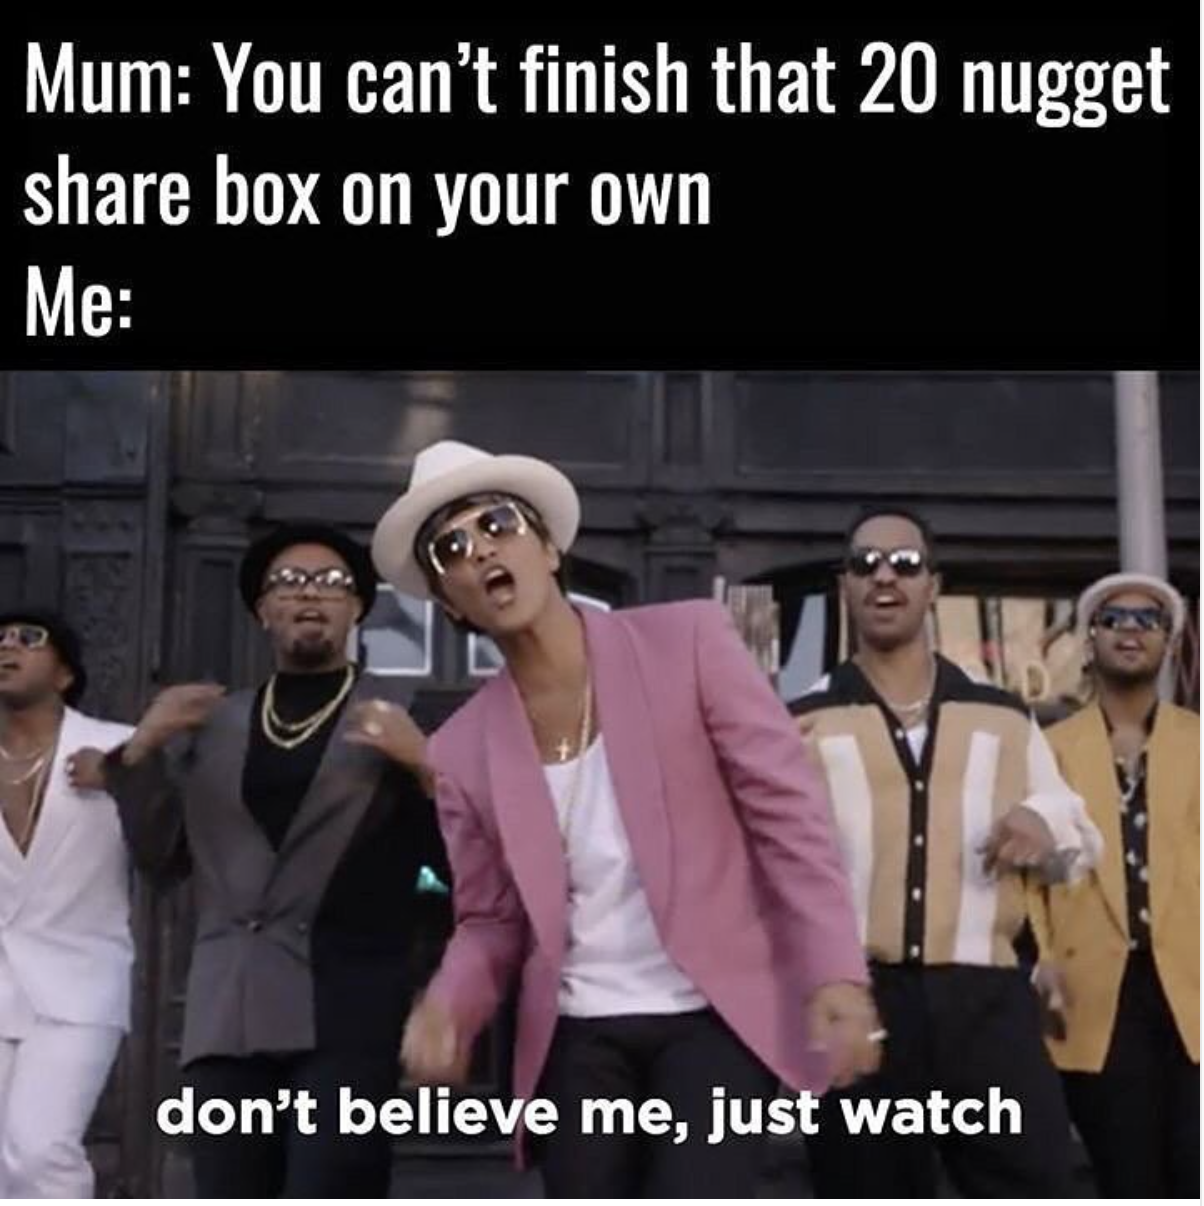 Bruno Mars meme about how it feels when mom says you can't finish that 20 nugget box on your own.